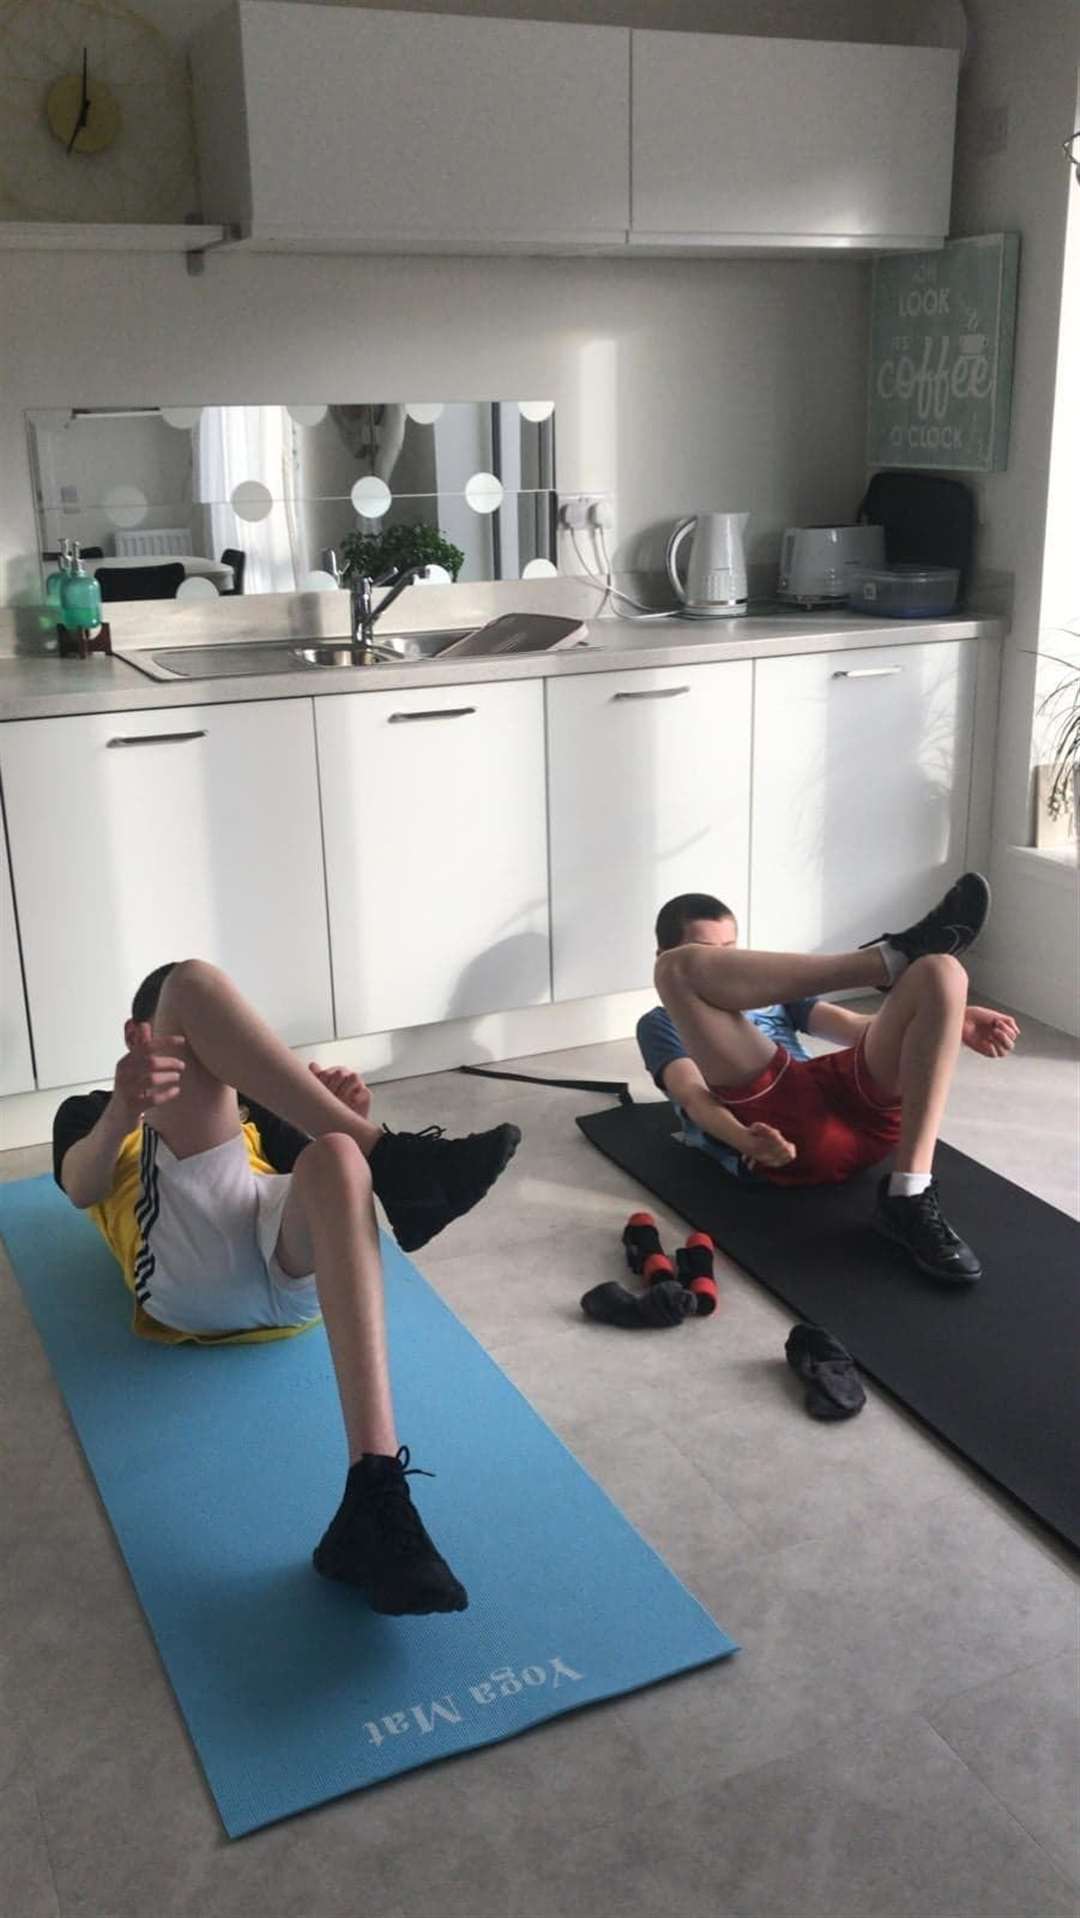 Lucca McCullie and his brother Josh stretching in their kitchen.